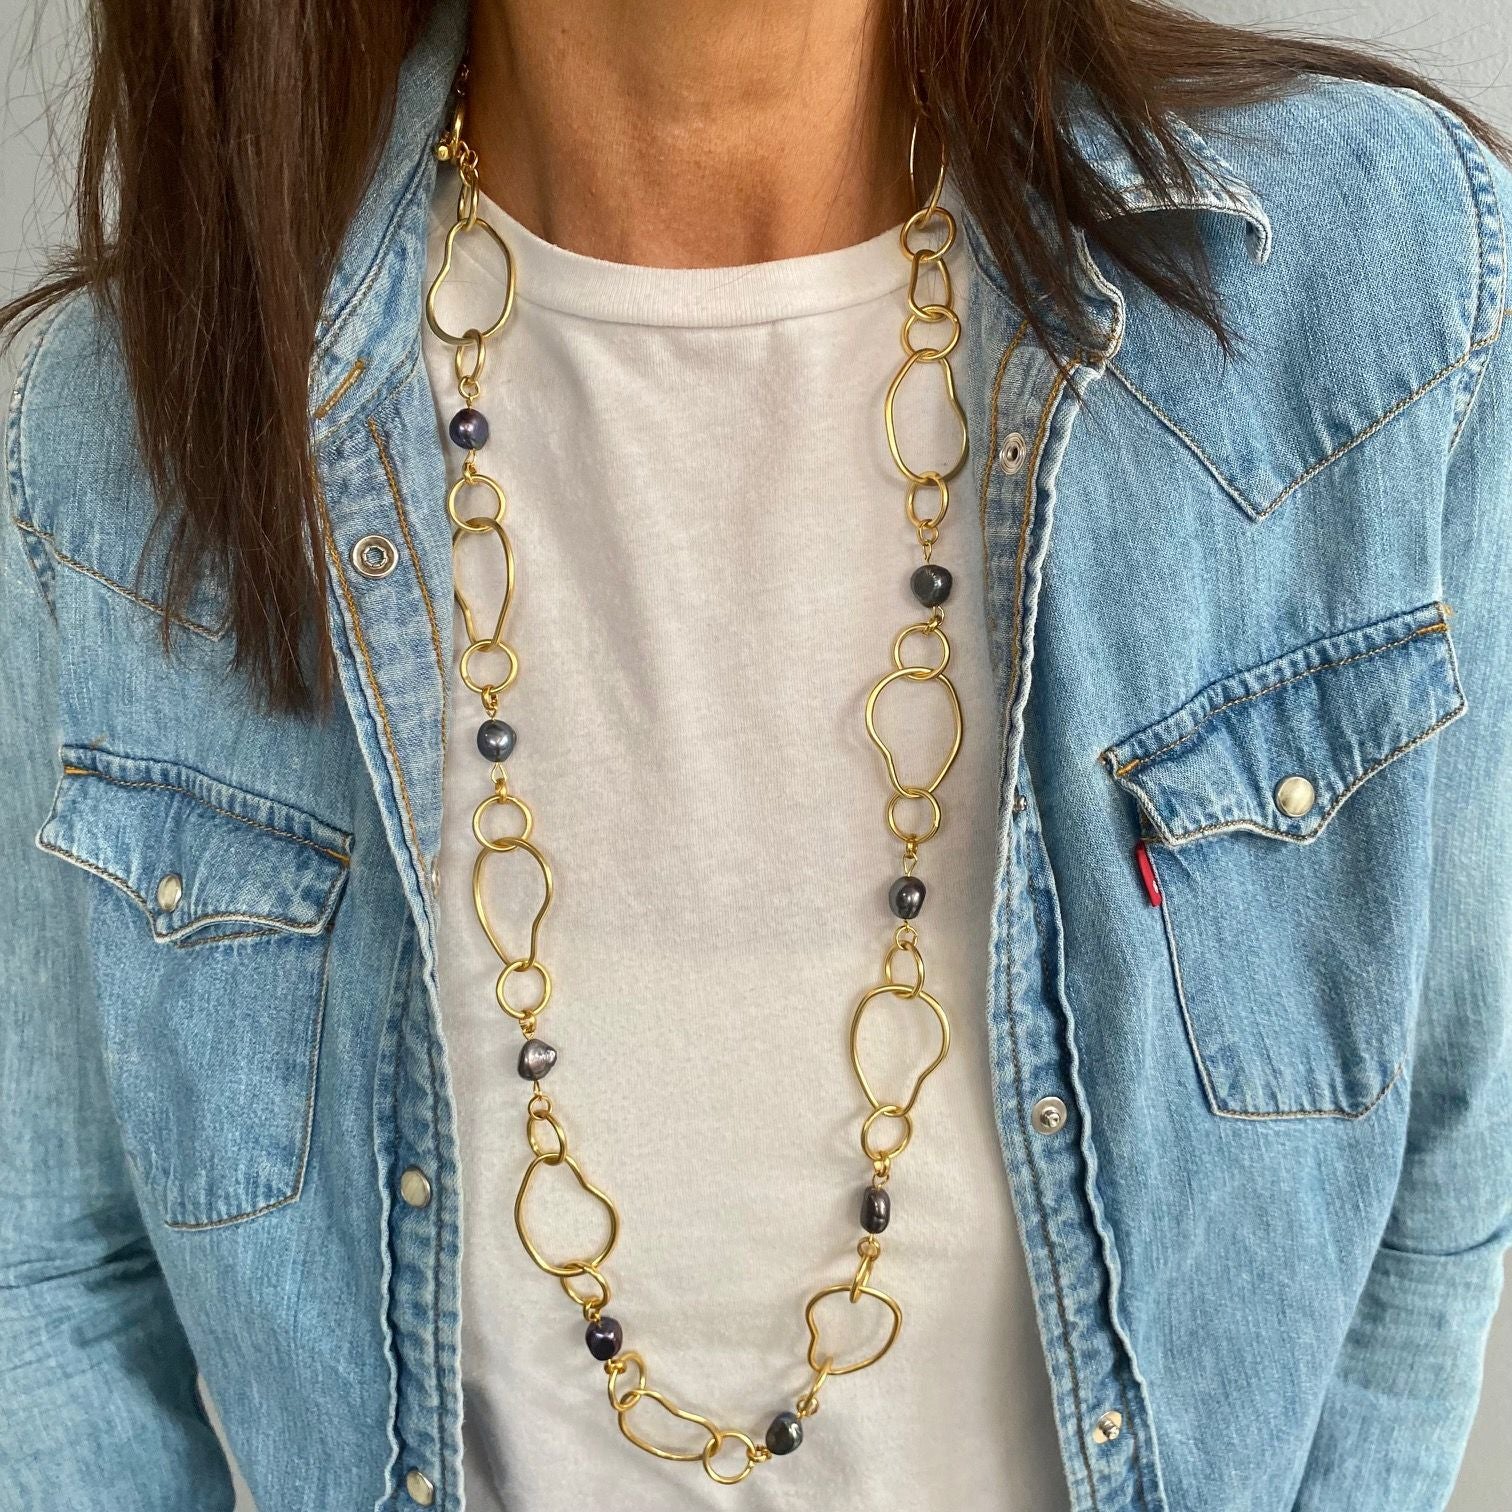 Organic link and peacock pearl station necklace